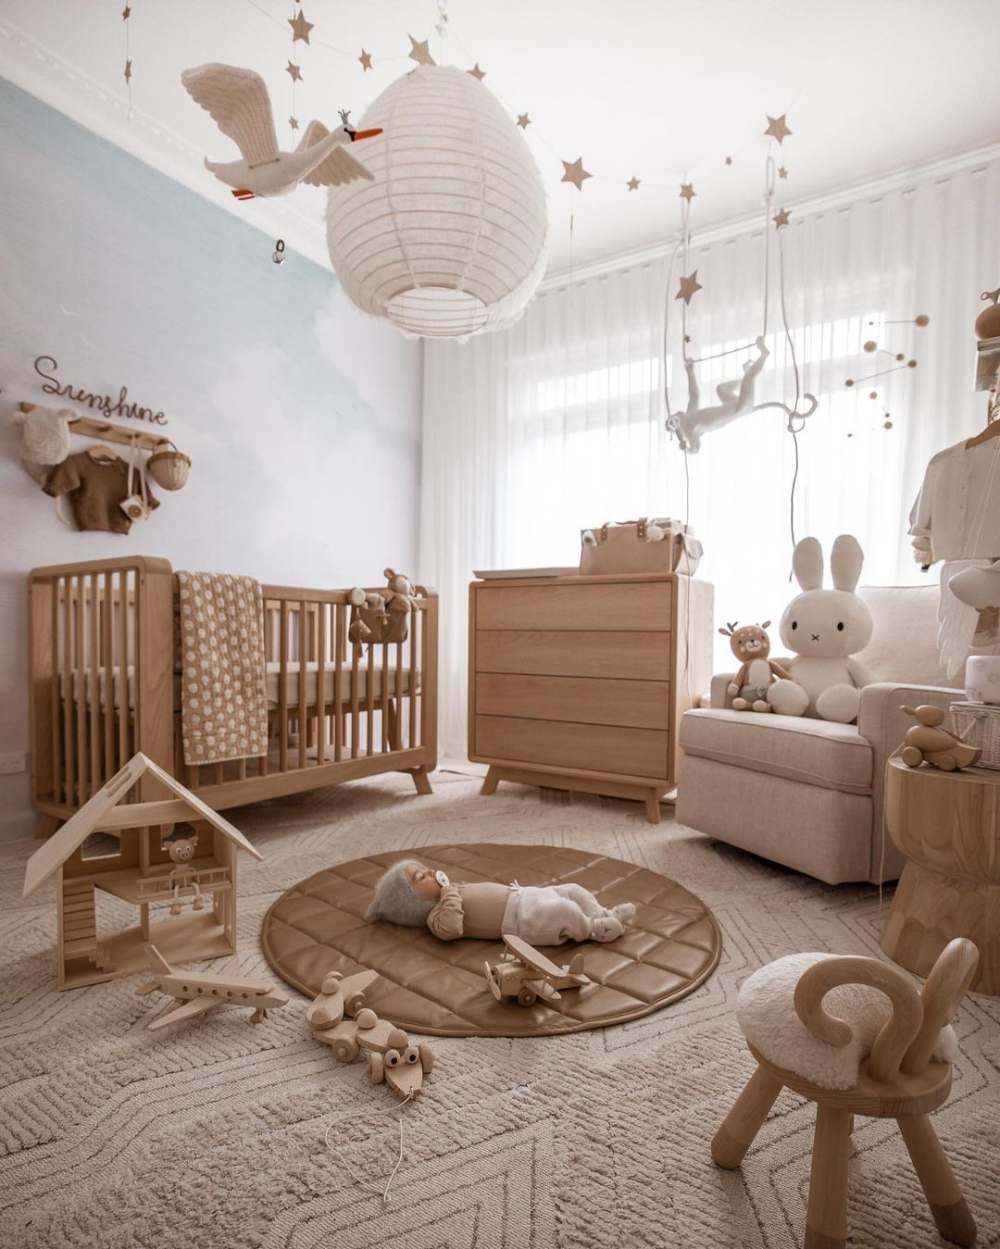 Top Features of Baby Bedding You Need to  Consider